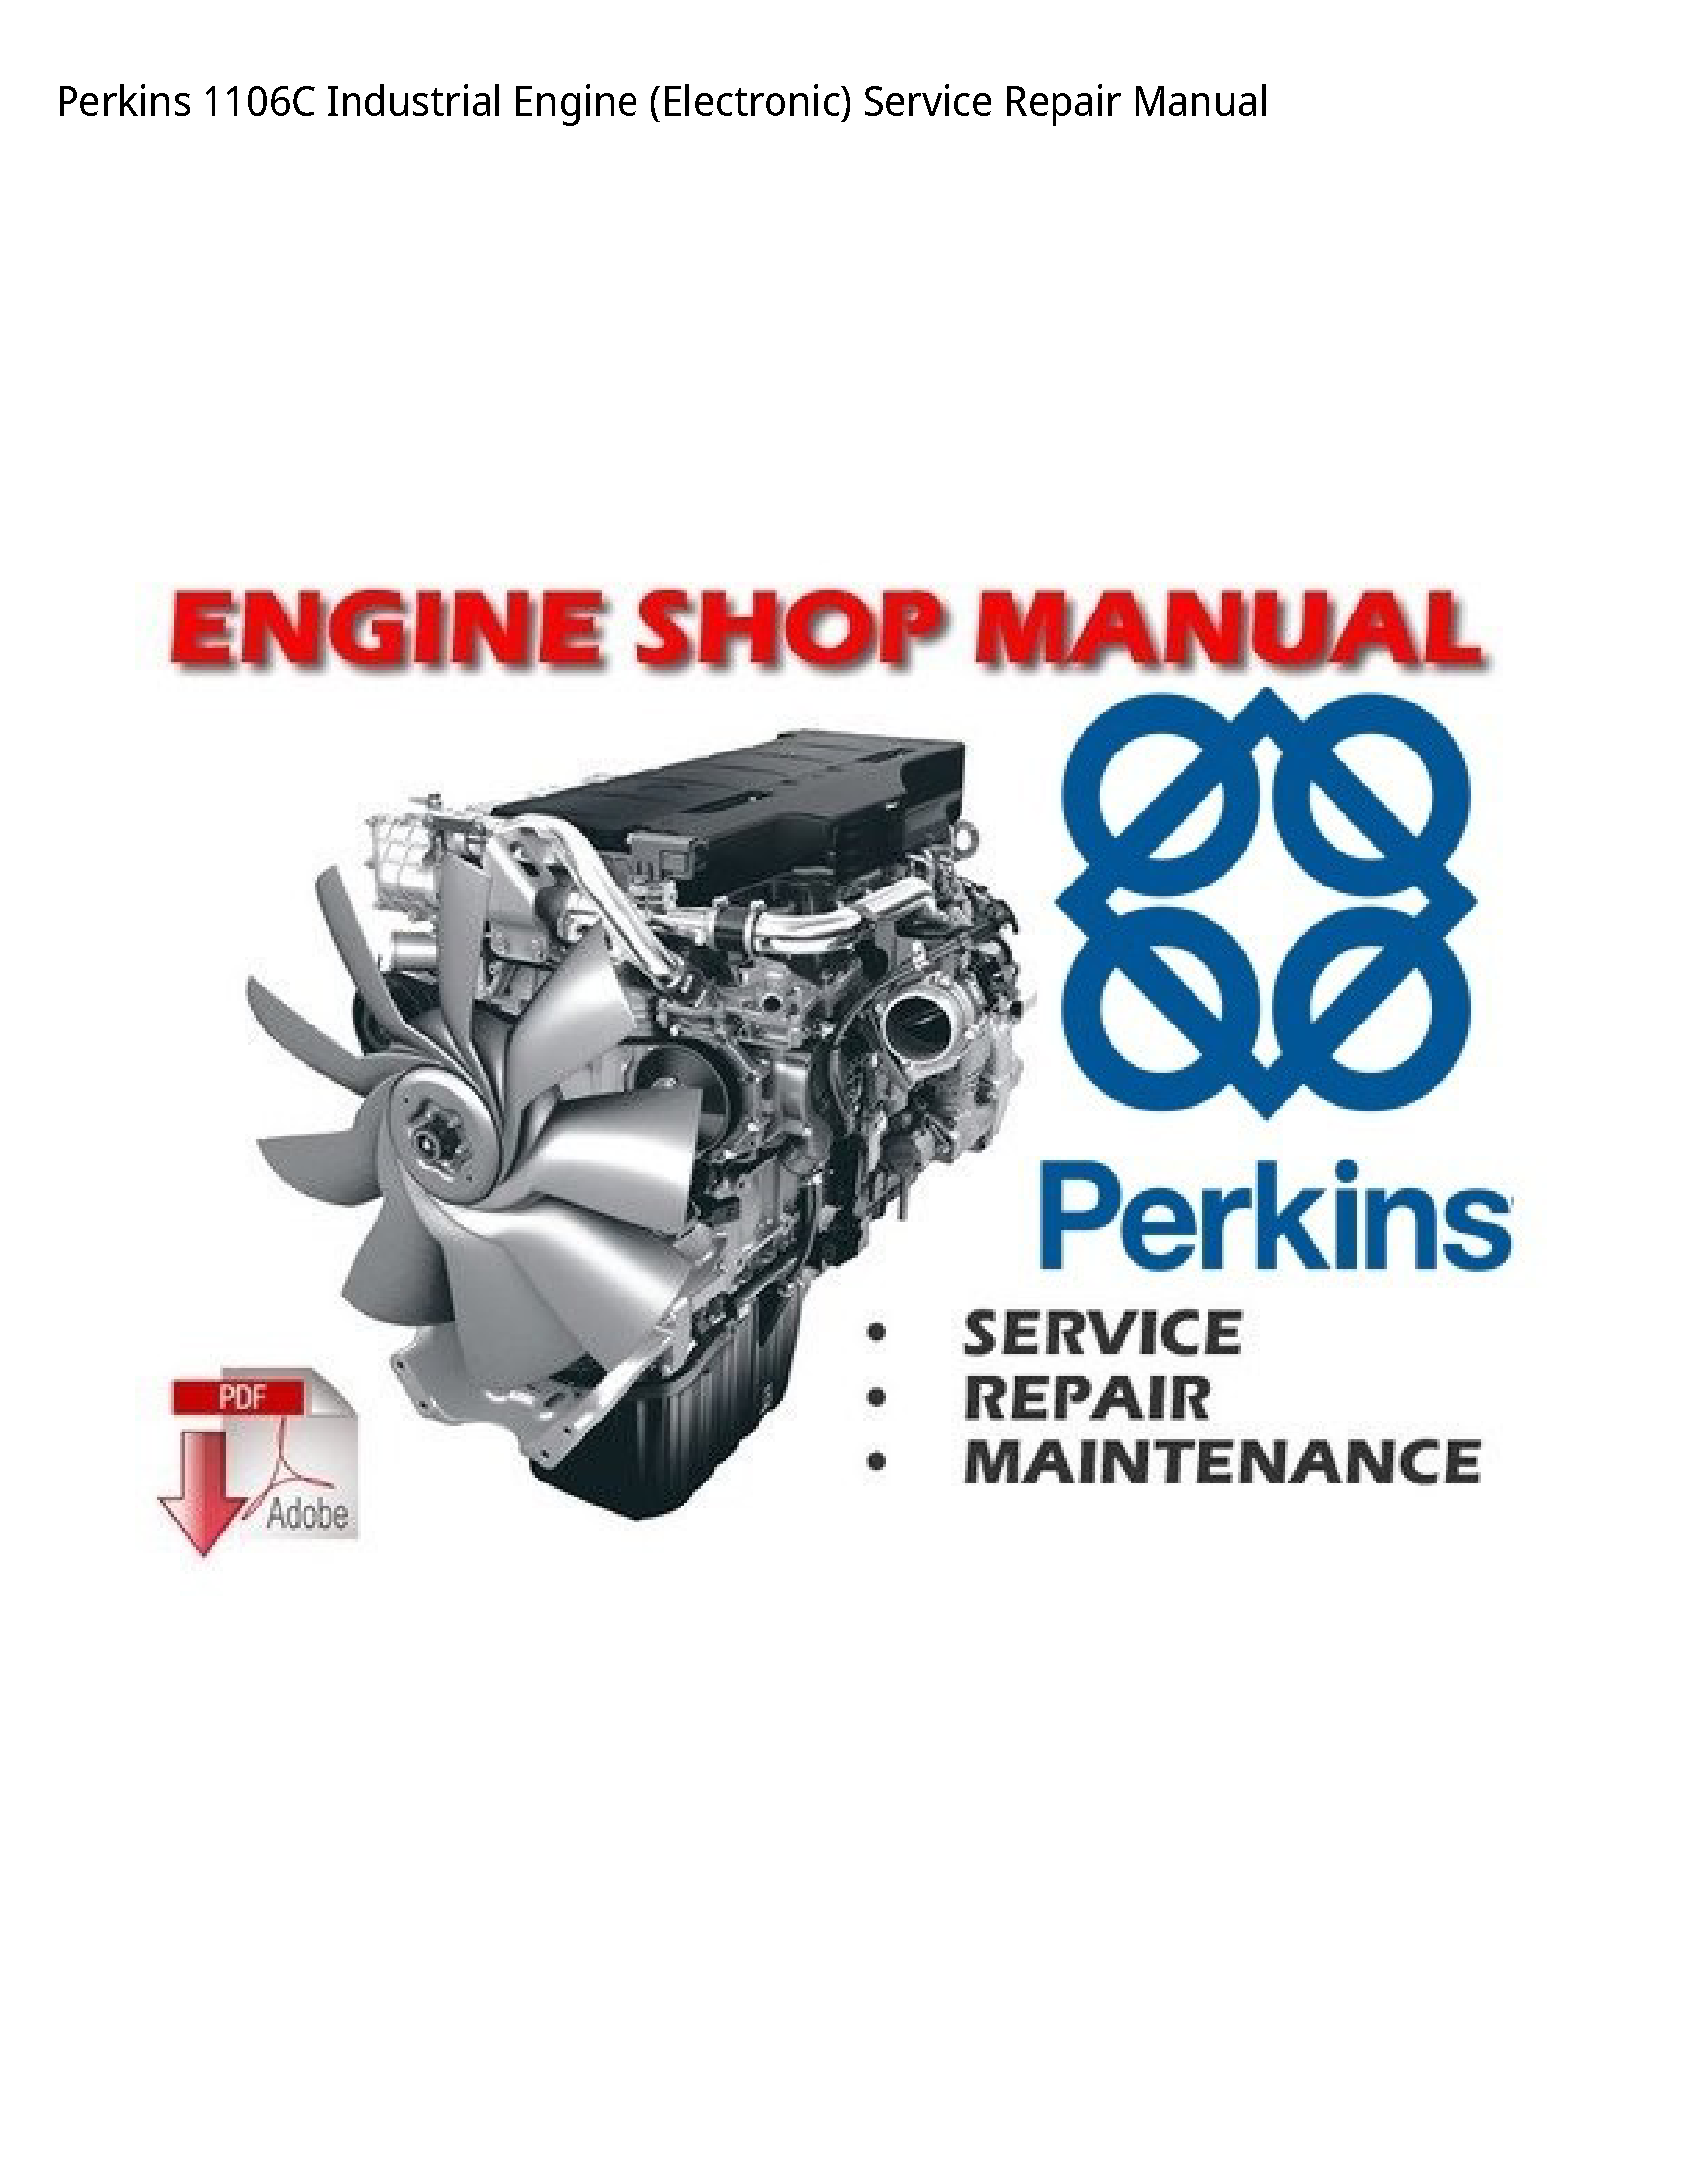 Perkins 1106C Industrial Engine (Electronic) manual